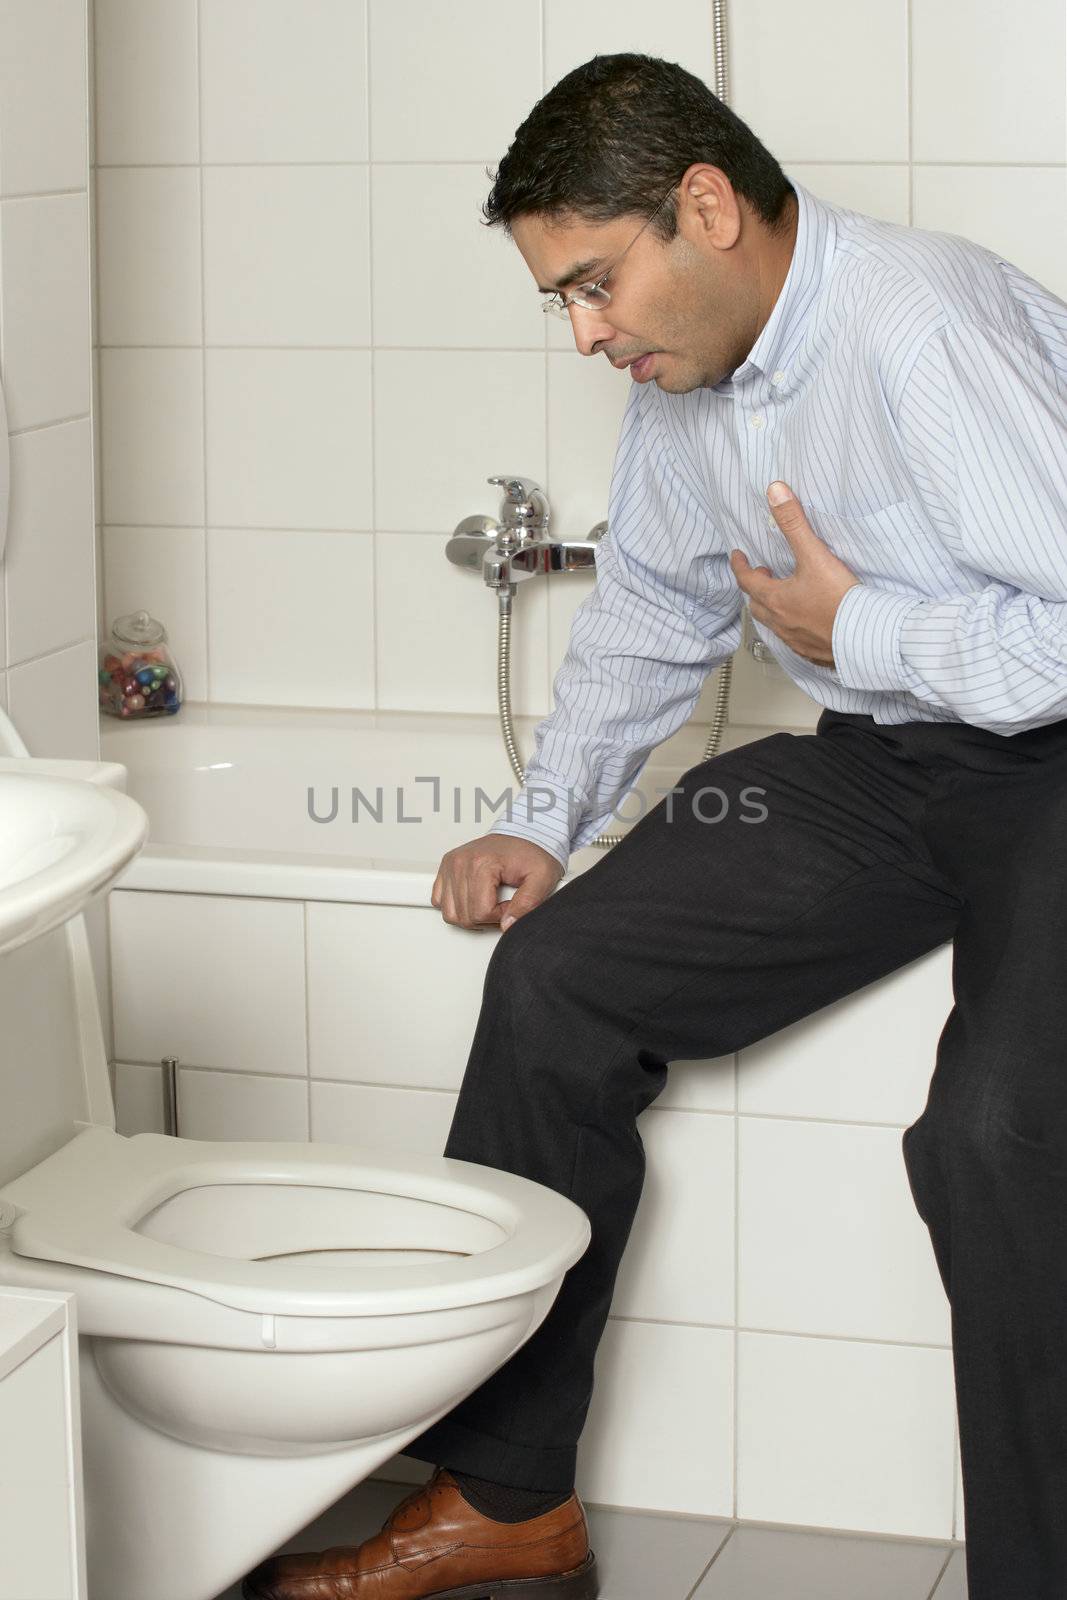 Photo of an adult male in his late thirties with stomach sickness about to vomit into his toilet.